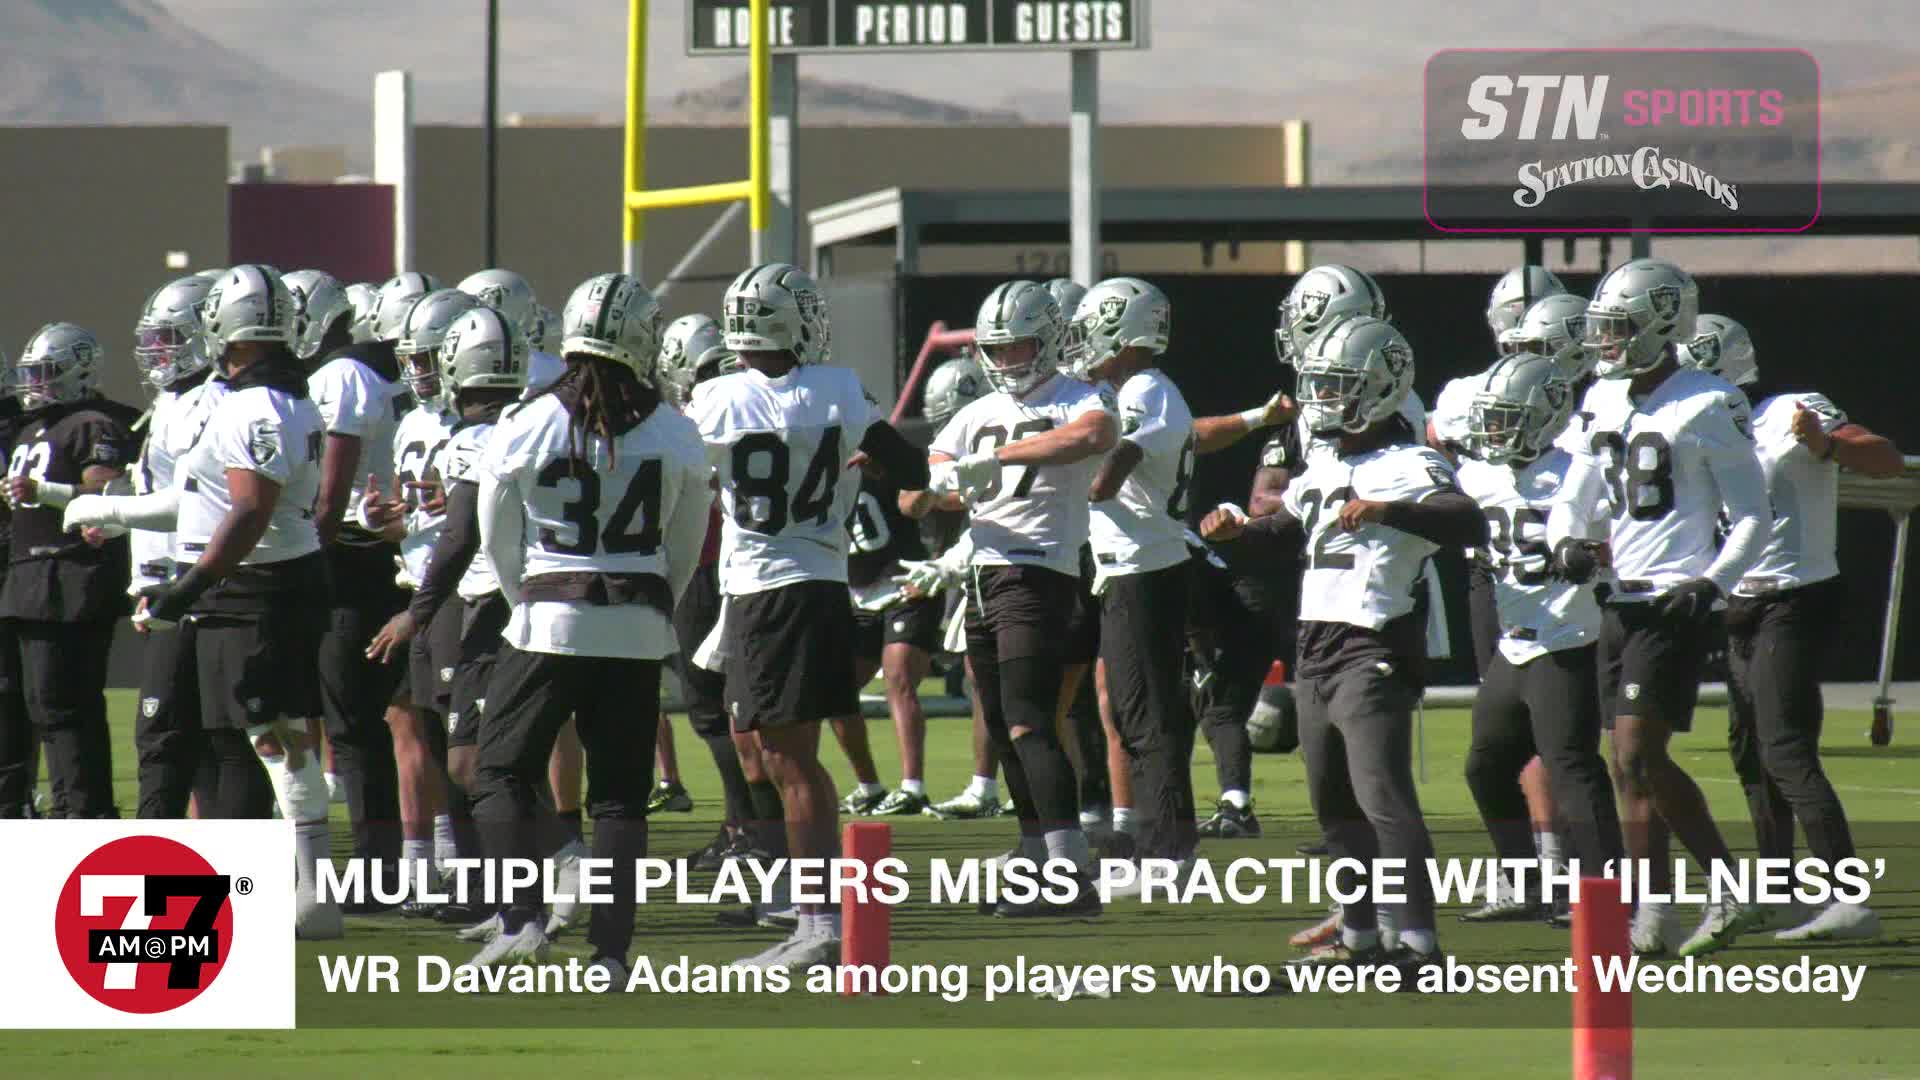 Raiders players absent from practice due to ‘illness’